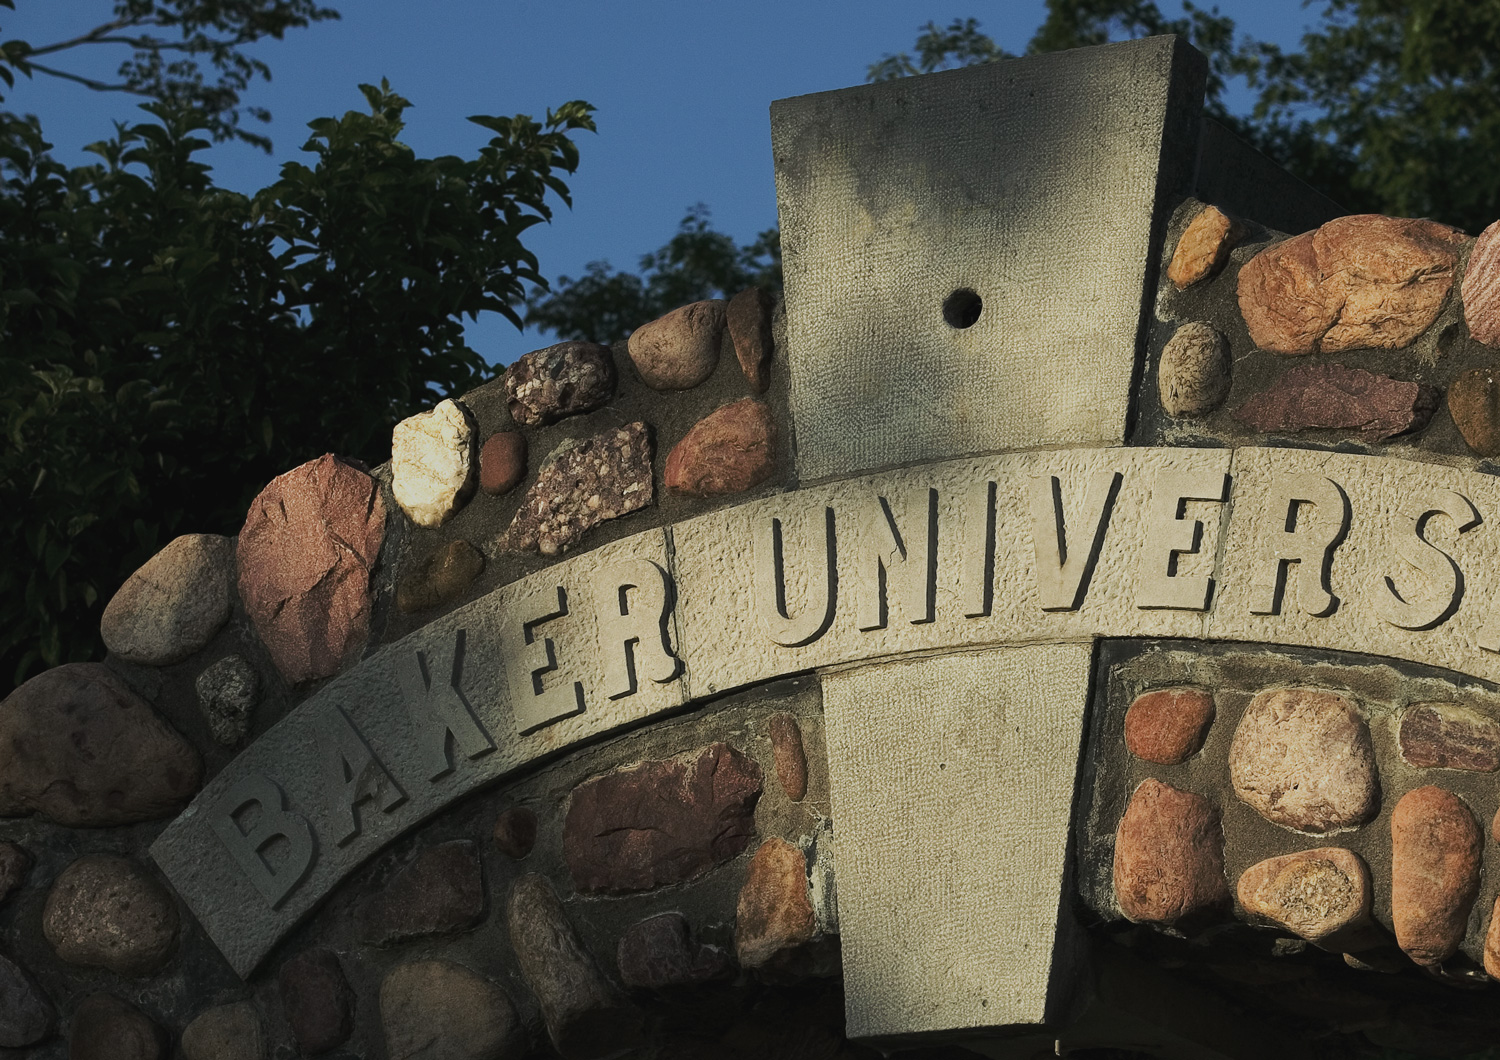 Stone arch with Baker University carved on the arch.